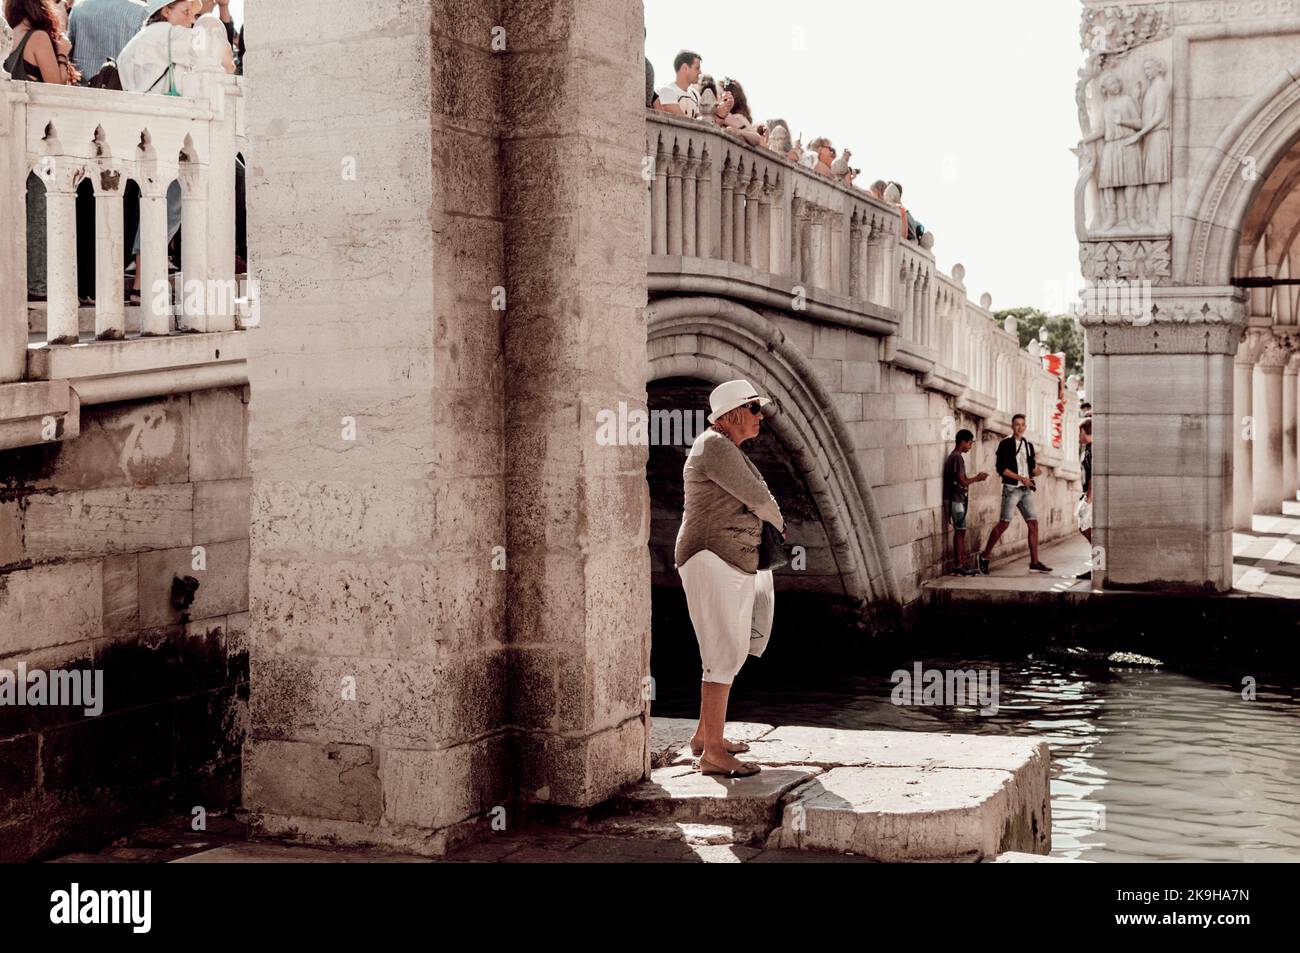 Venice, Italy. September 9, 2015. Some glimpses of the city of Venice attacked by tourists Stock Photo